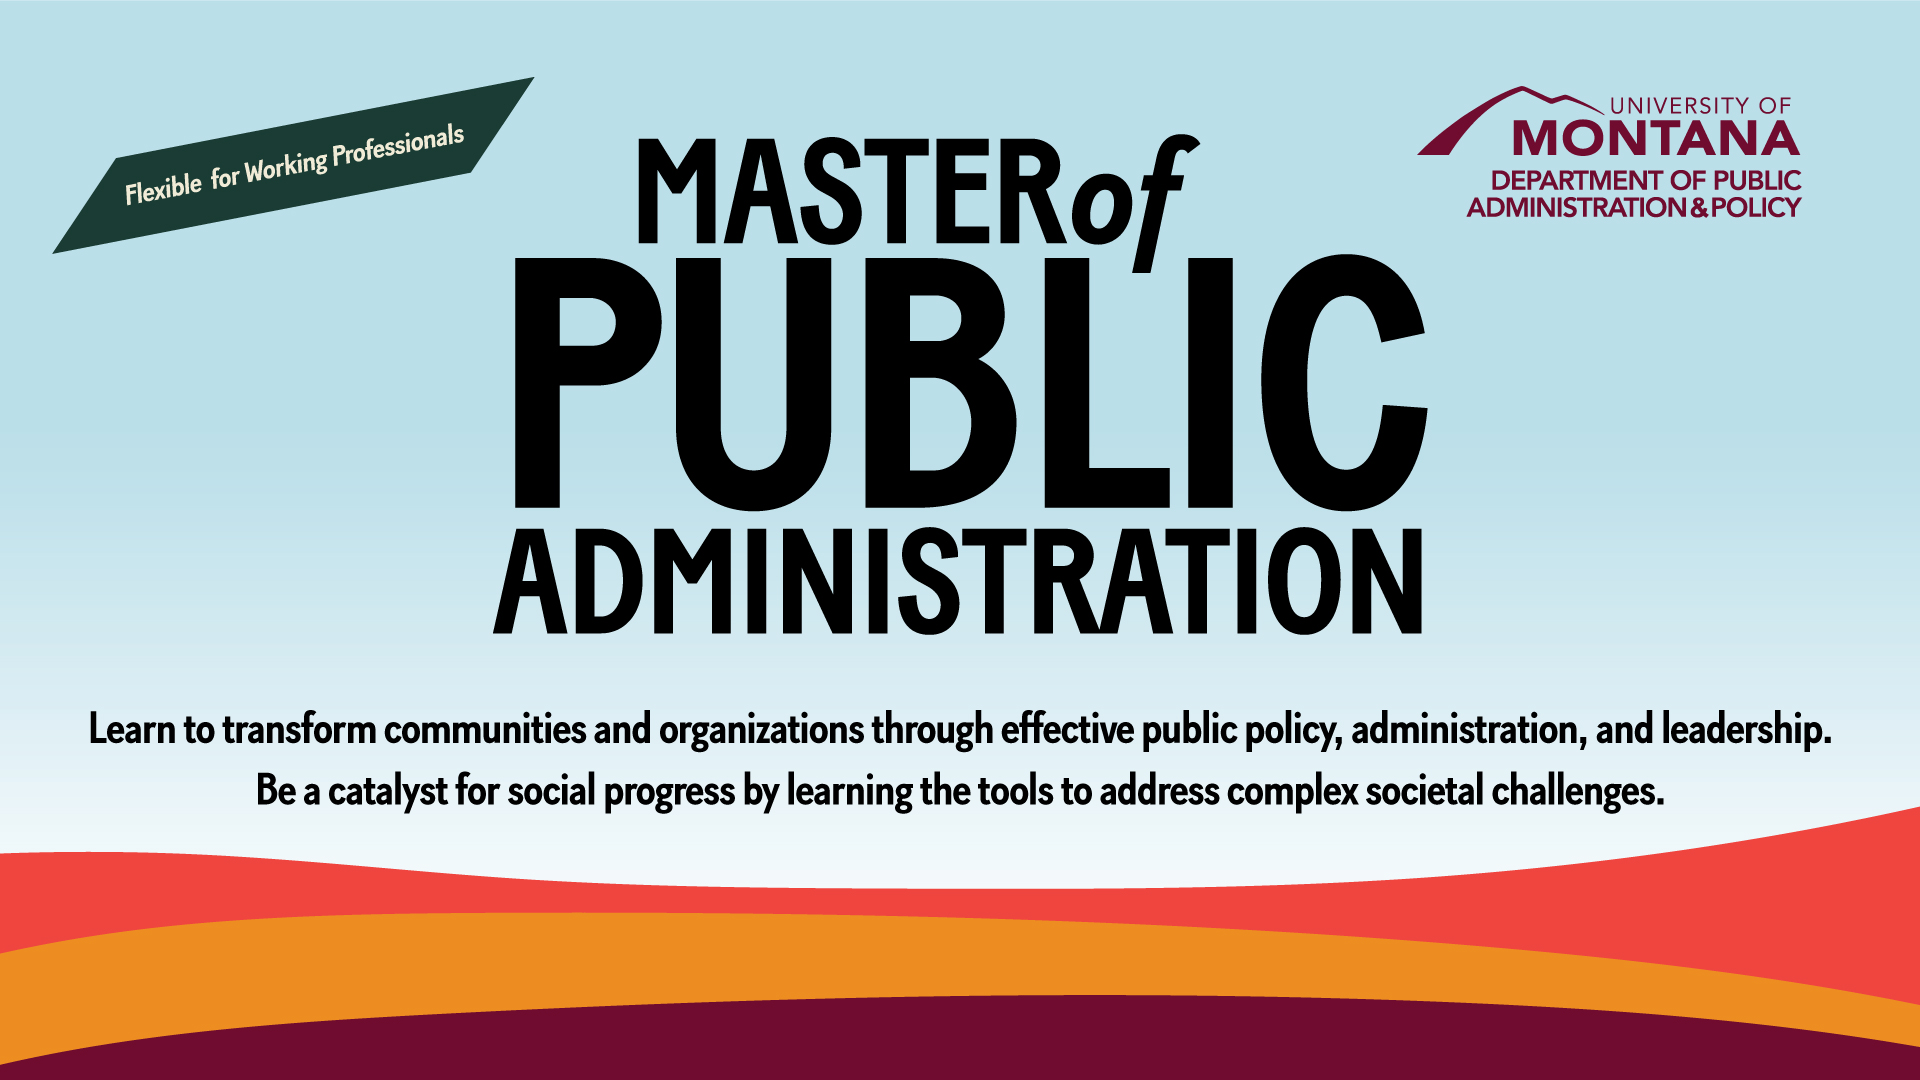 master of public administration. Learn to transform communities and organizations through effective public policy, administration, and leadership. Be a catalyst for social progress by learning the tools to address complex societal challenges.